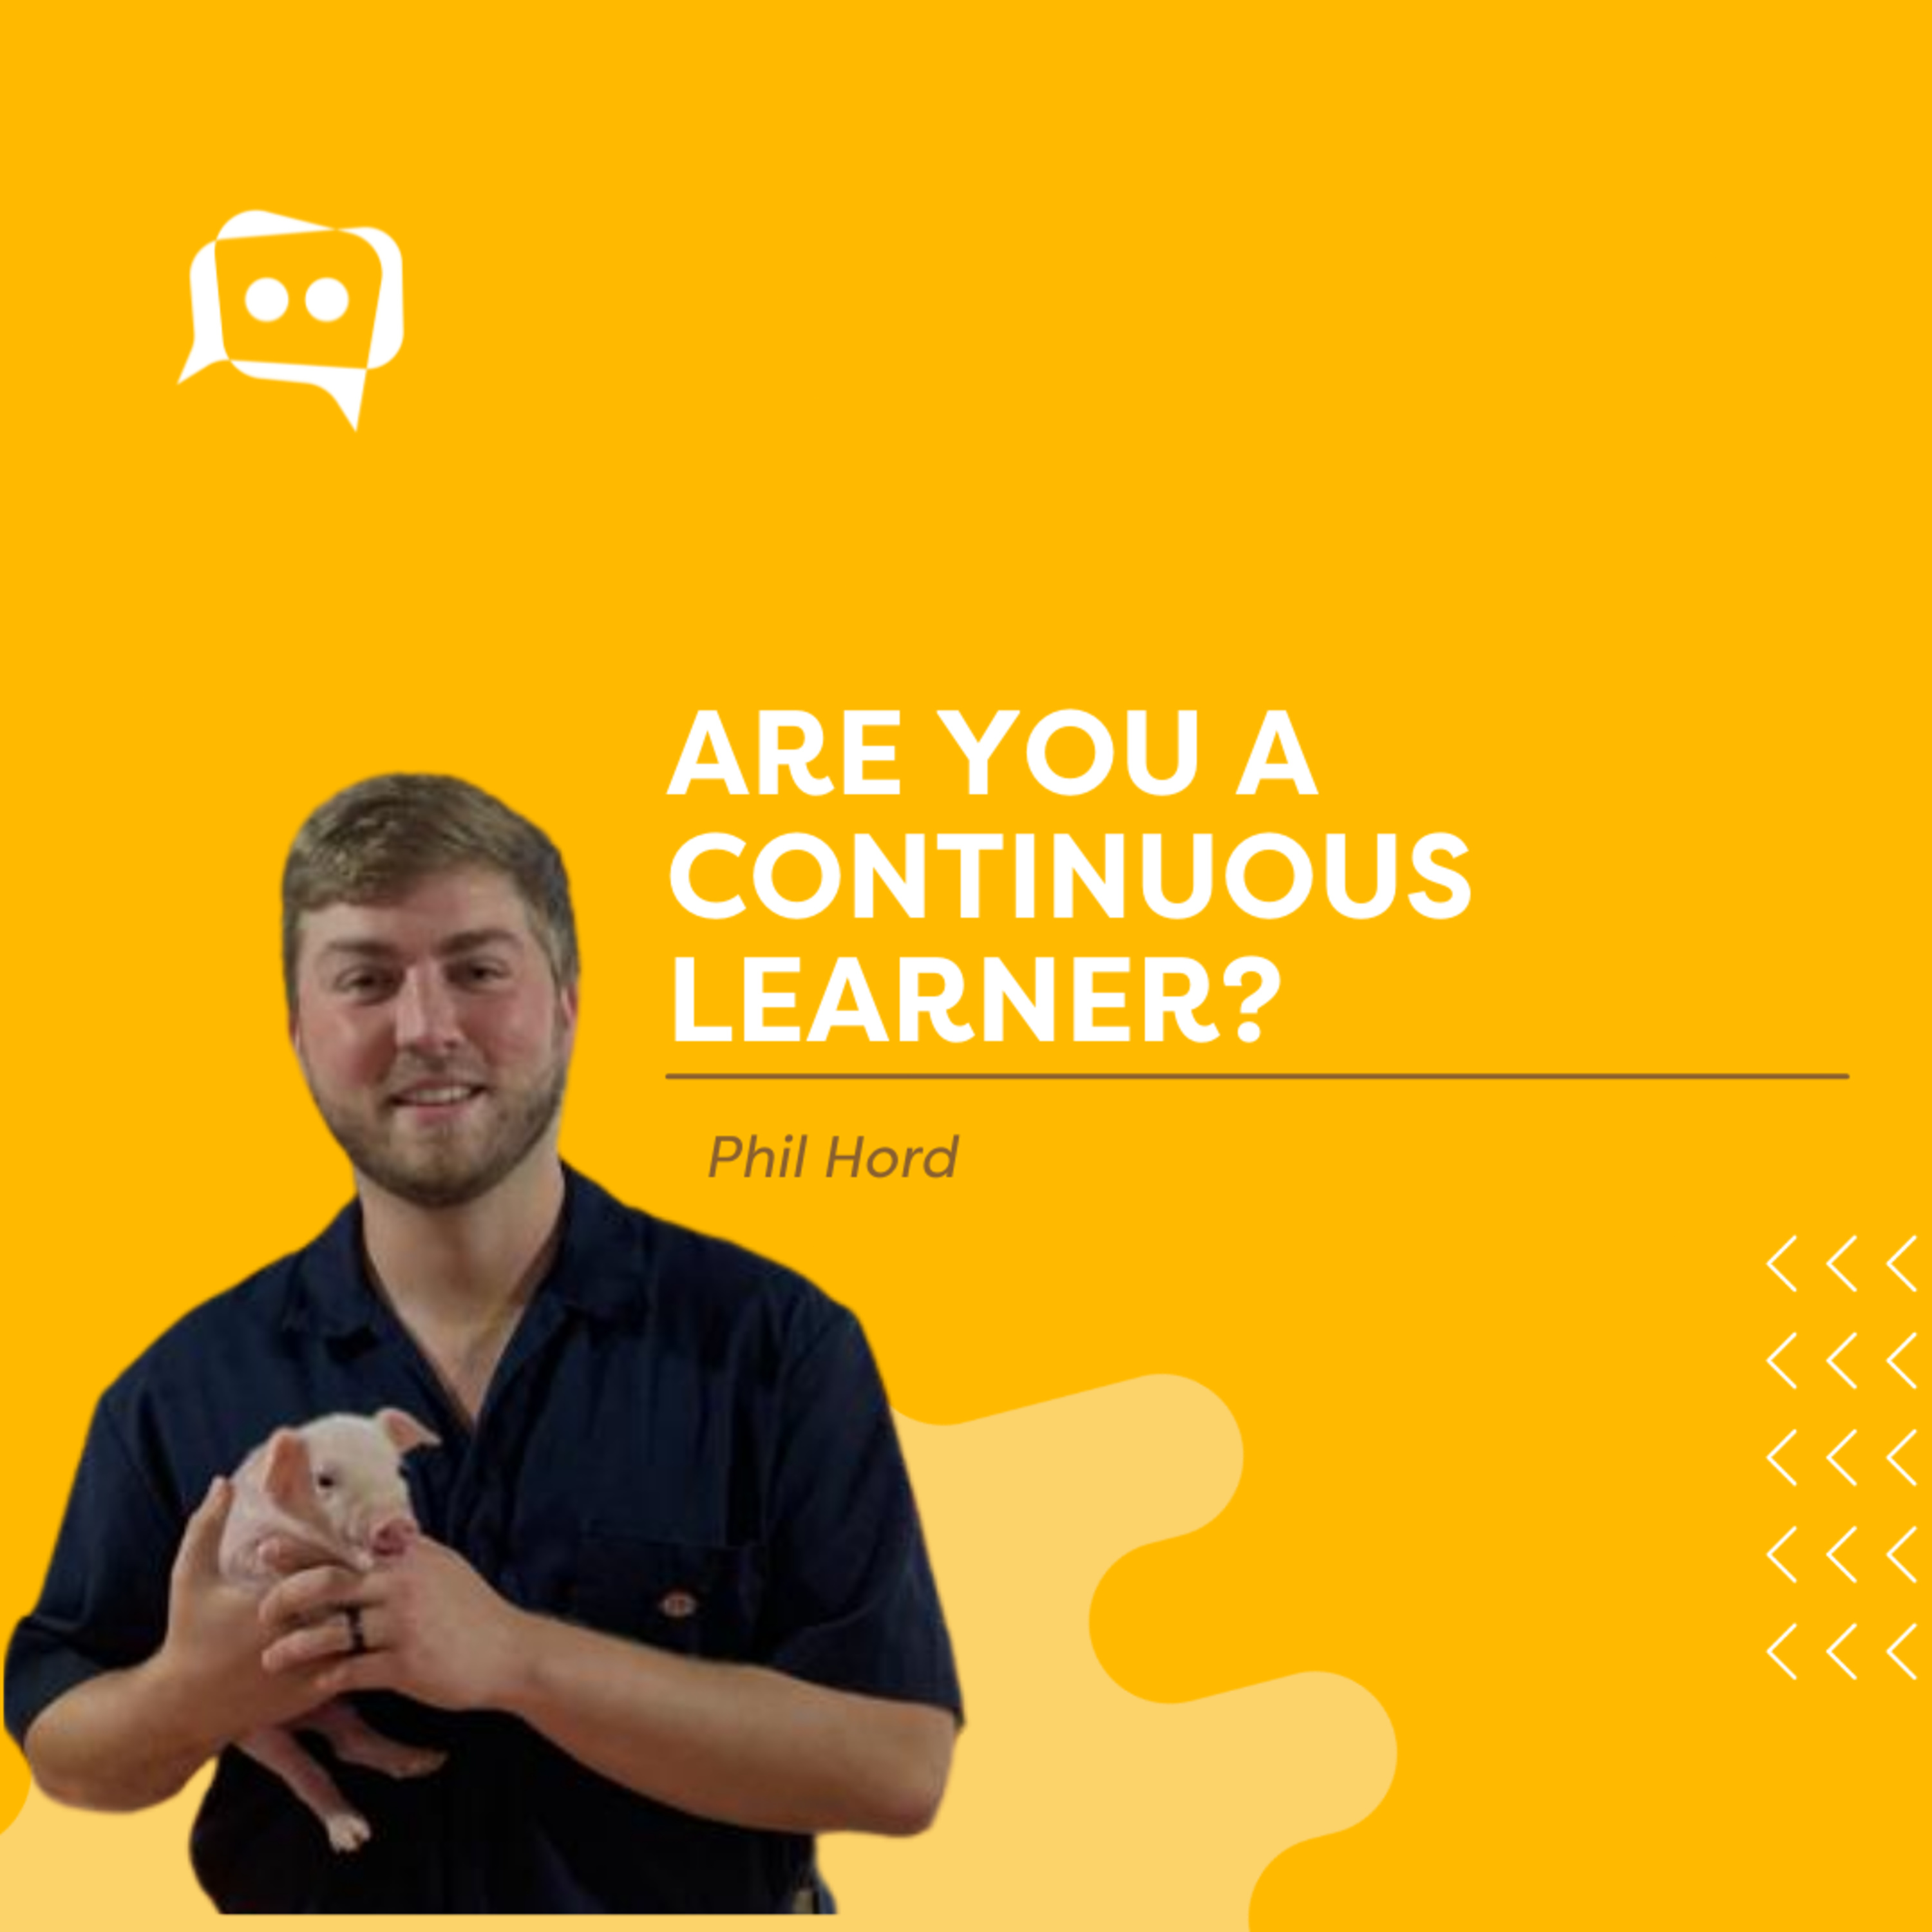 #SHORTS: Are you a continuous learner? With Phil Hord